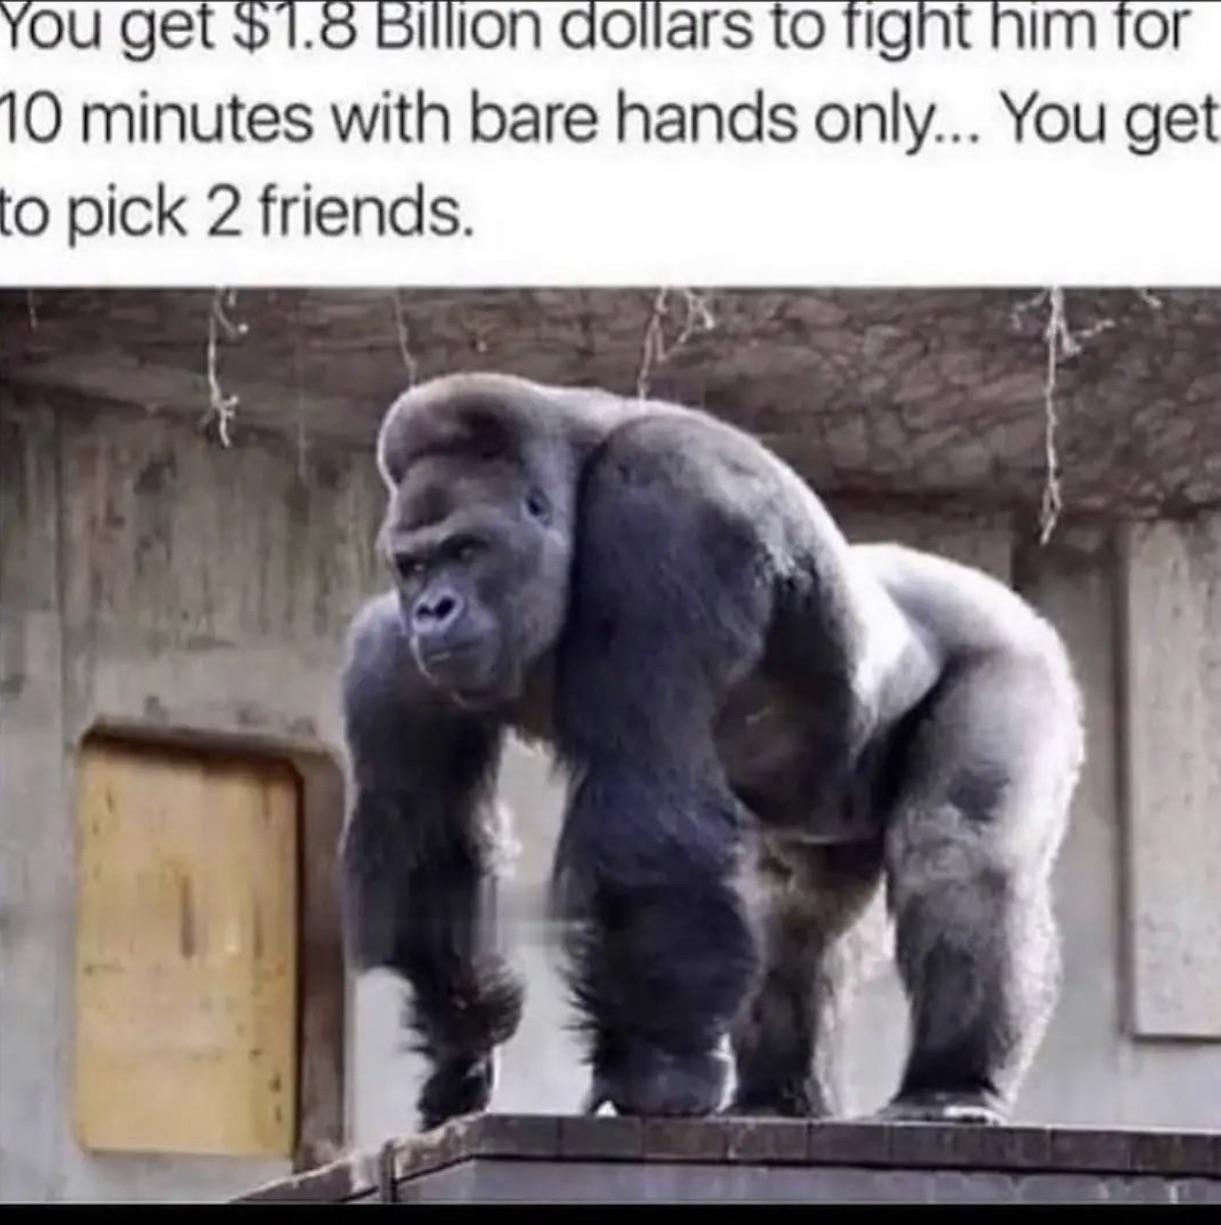 japanese sexy gorilla - You get $1.8 Billion dollars to fight him for 10 minutes with bare hands only... You get to pick 2 friends.